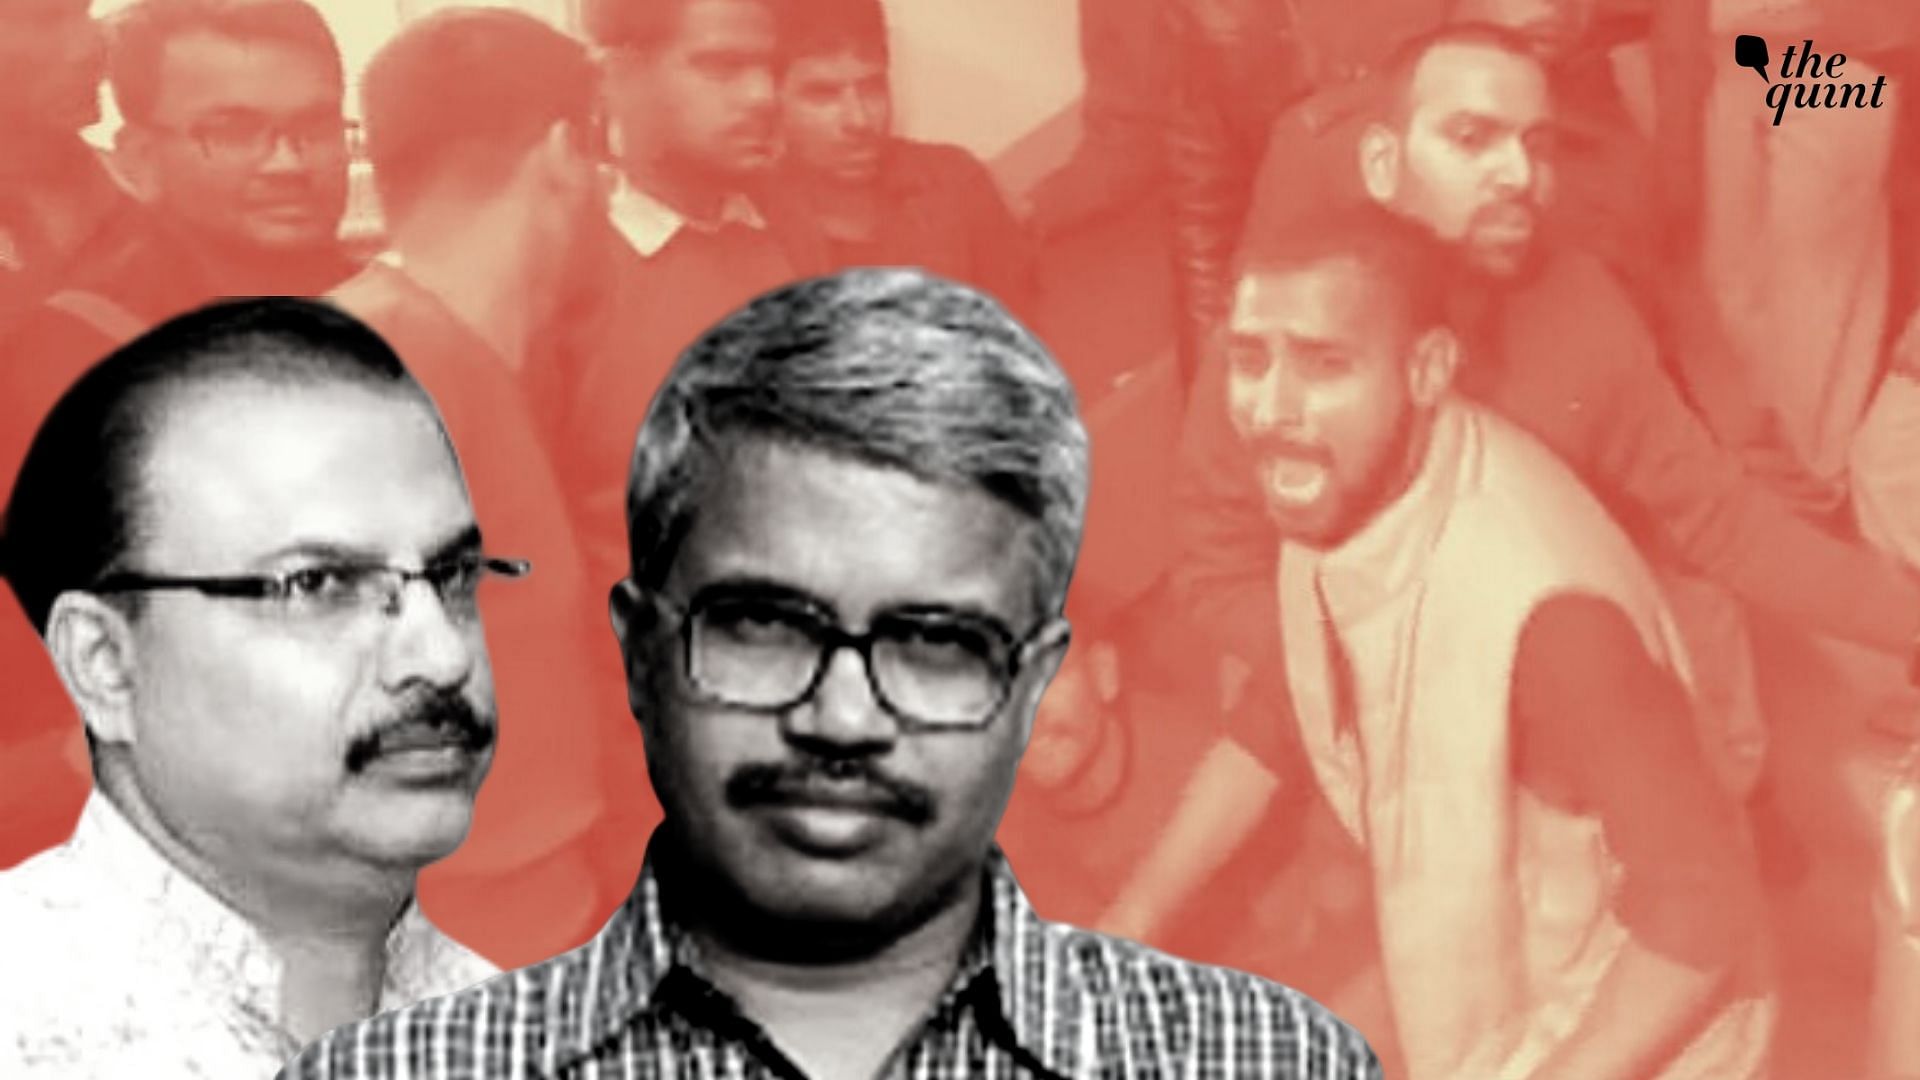 A group of students demanded the suspension of two visiting professors – Dilip Mandal and Mukesh Kumar.